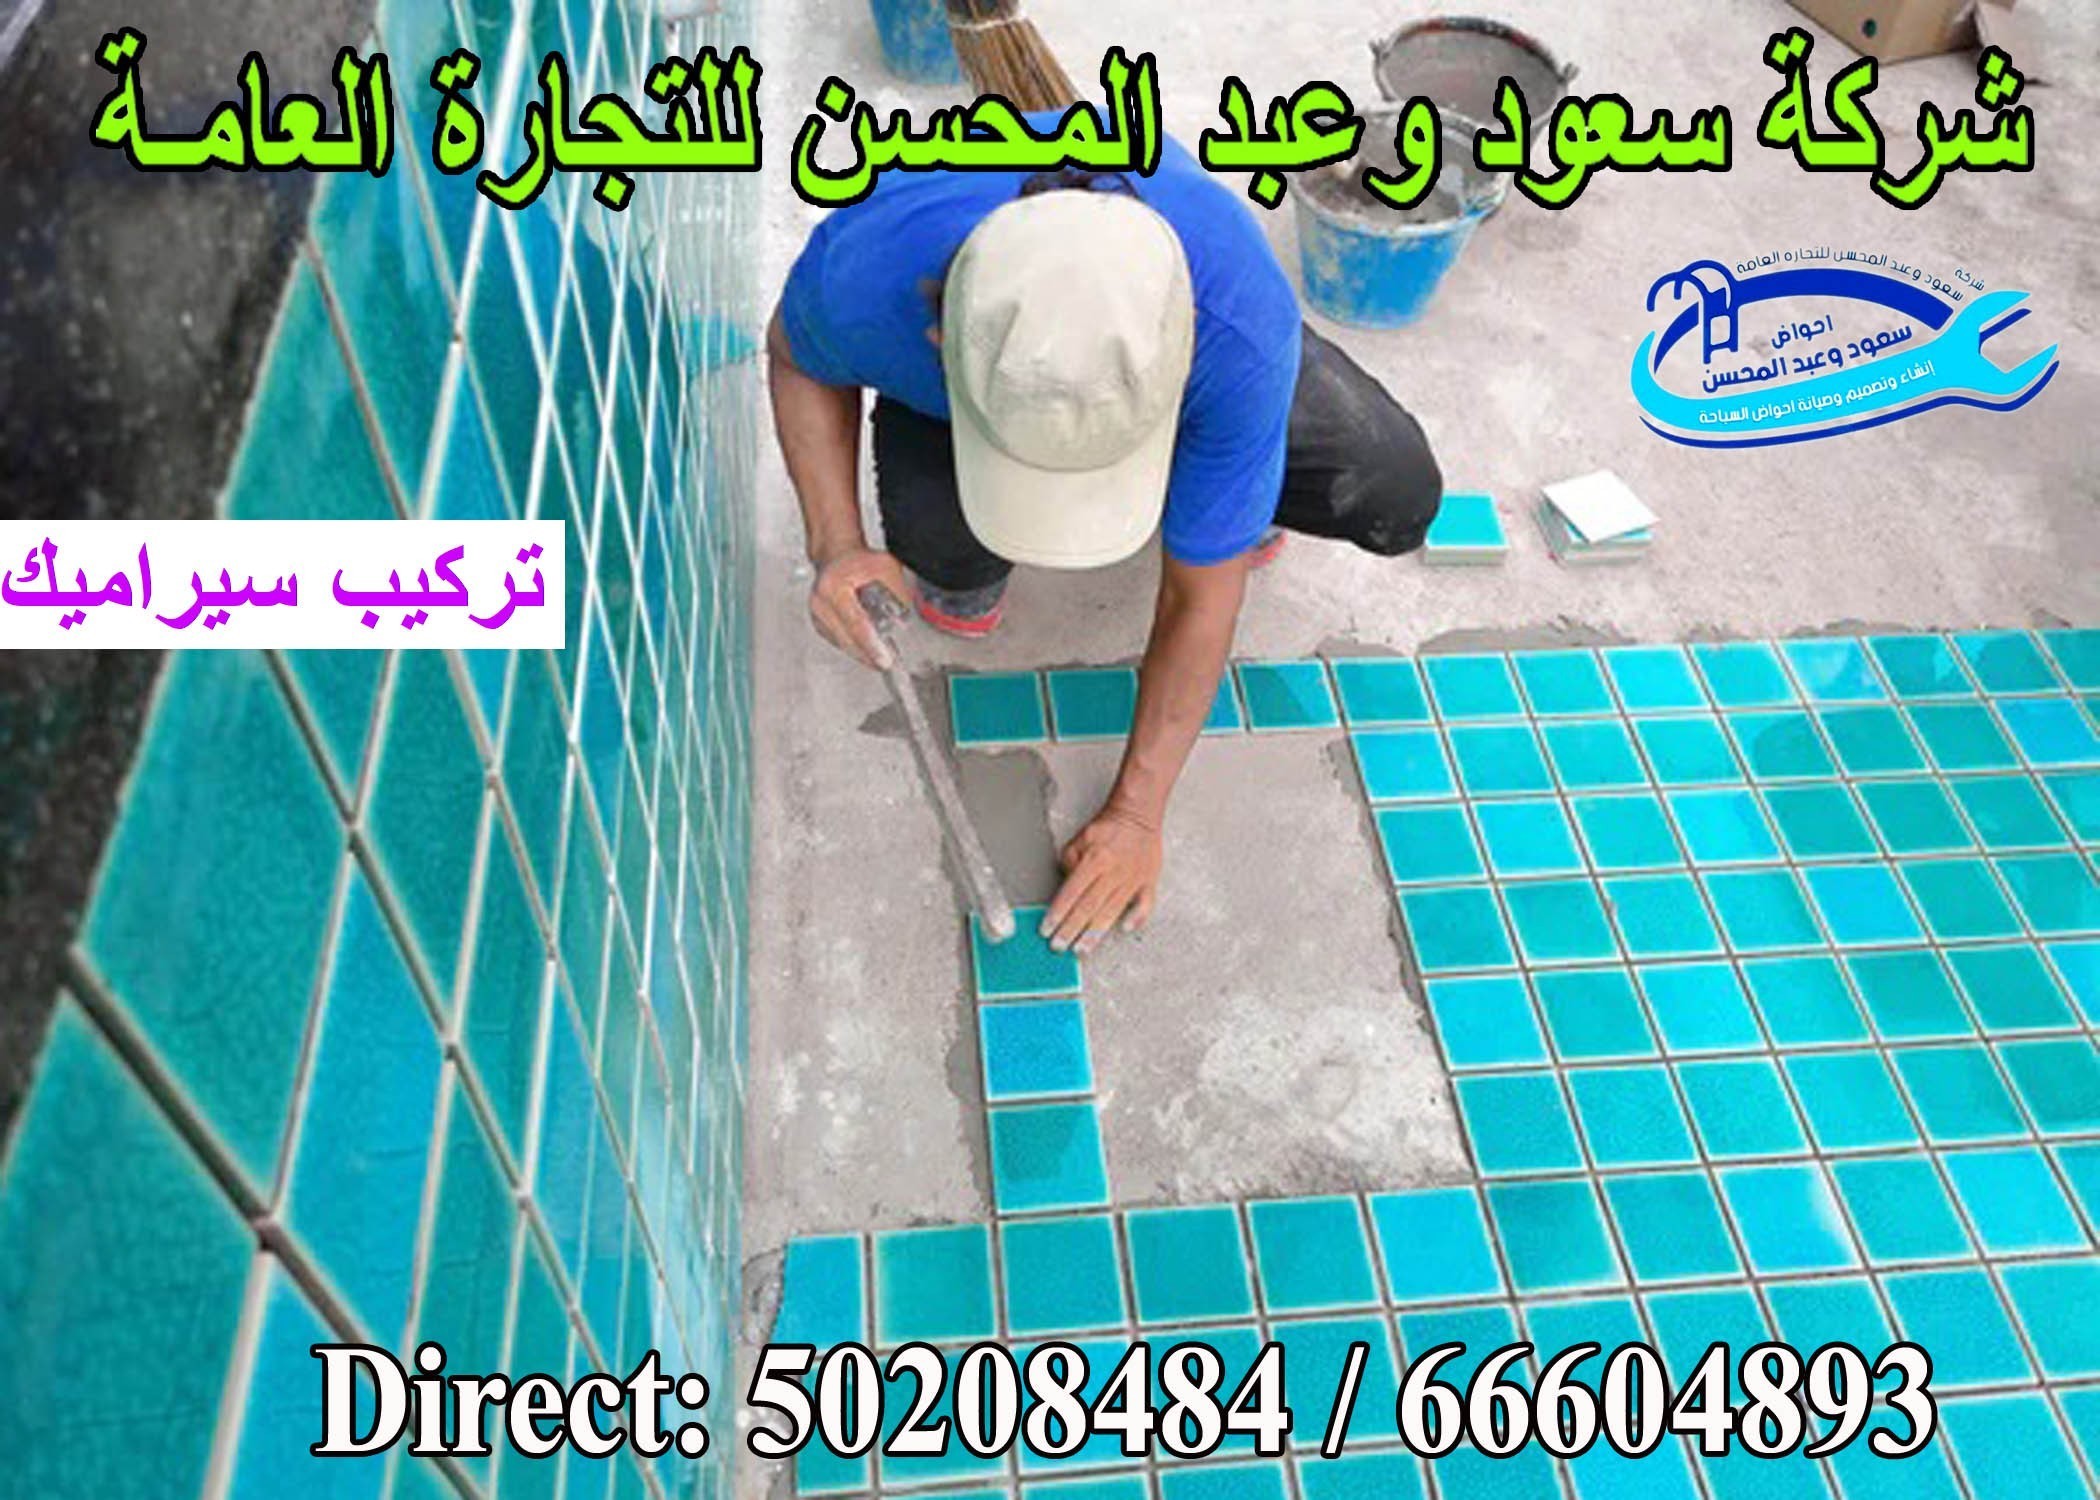 POOL CONSTRUCTIONS & CLEANING AND MAINTENANCE WORKS IN KUWAIT